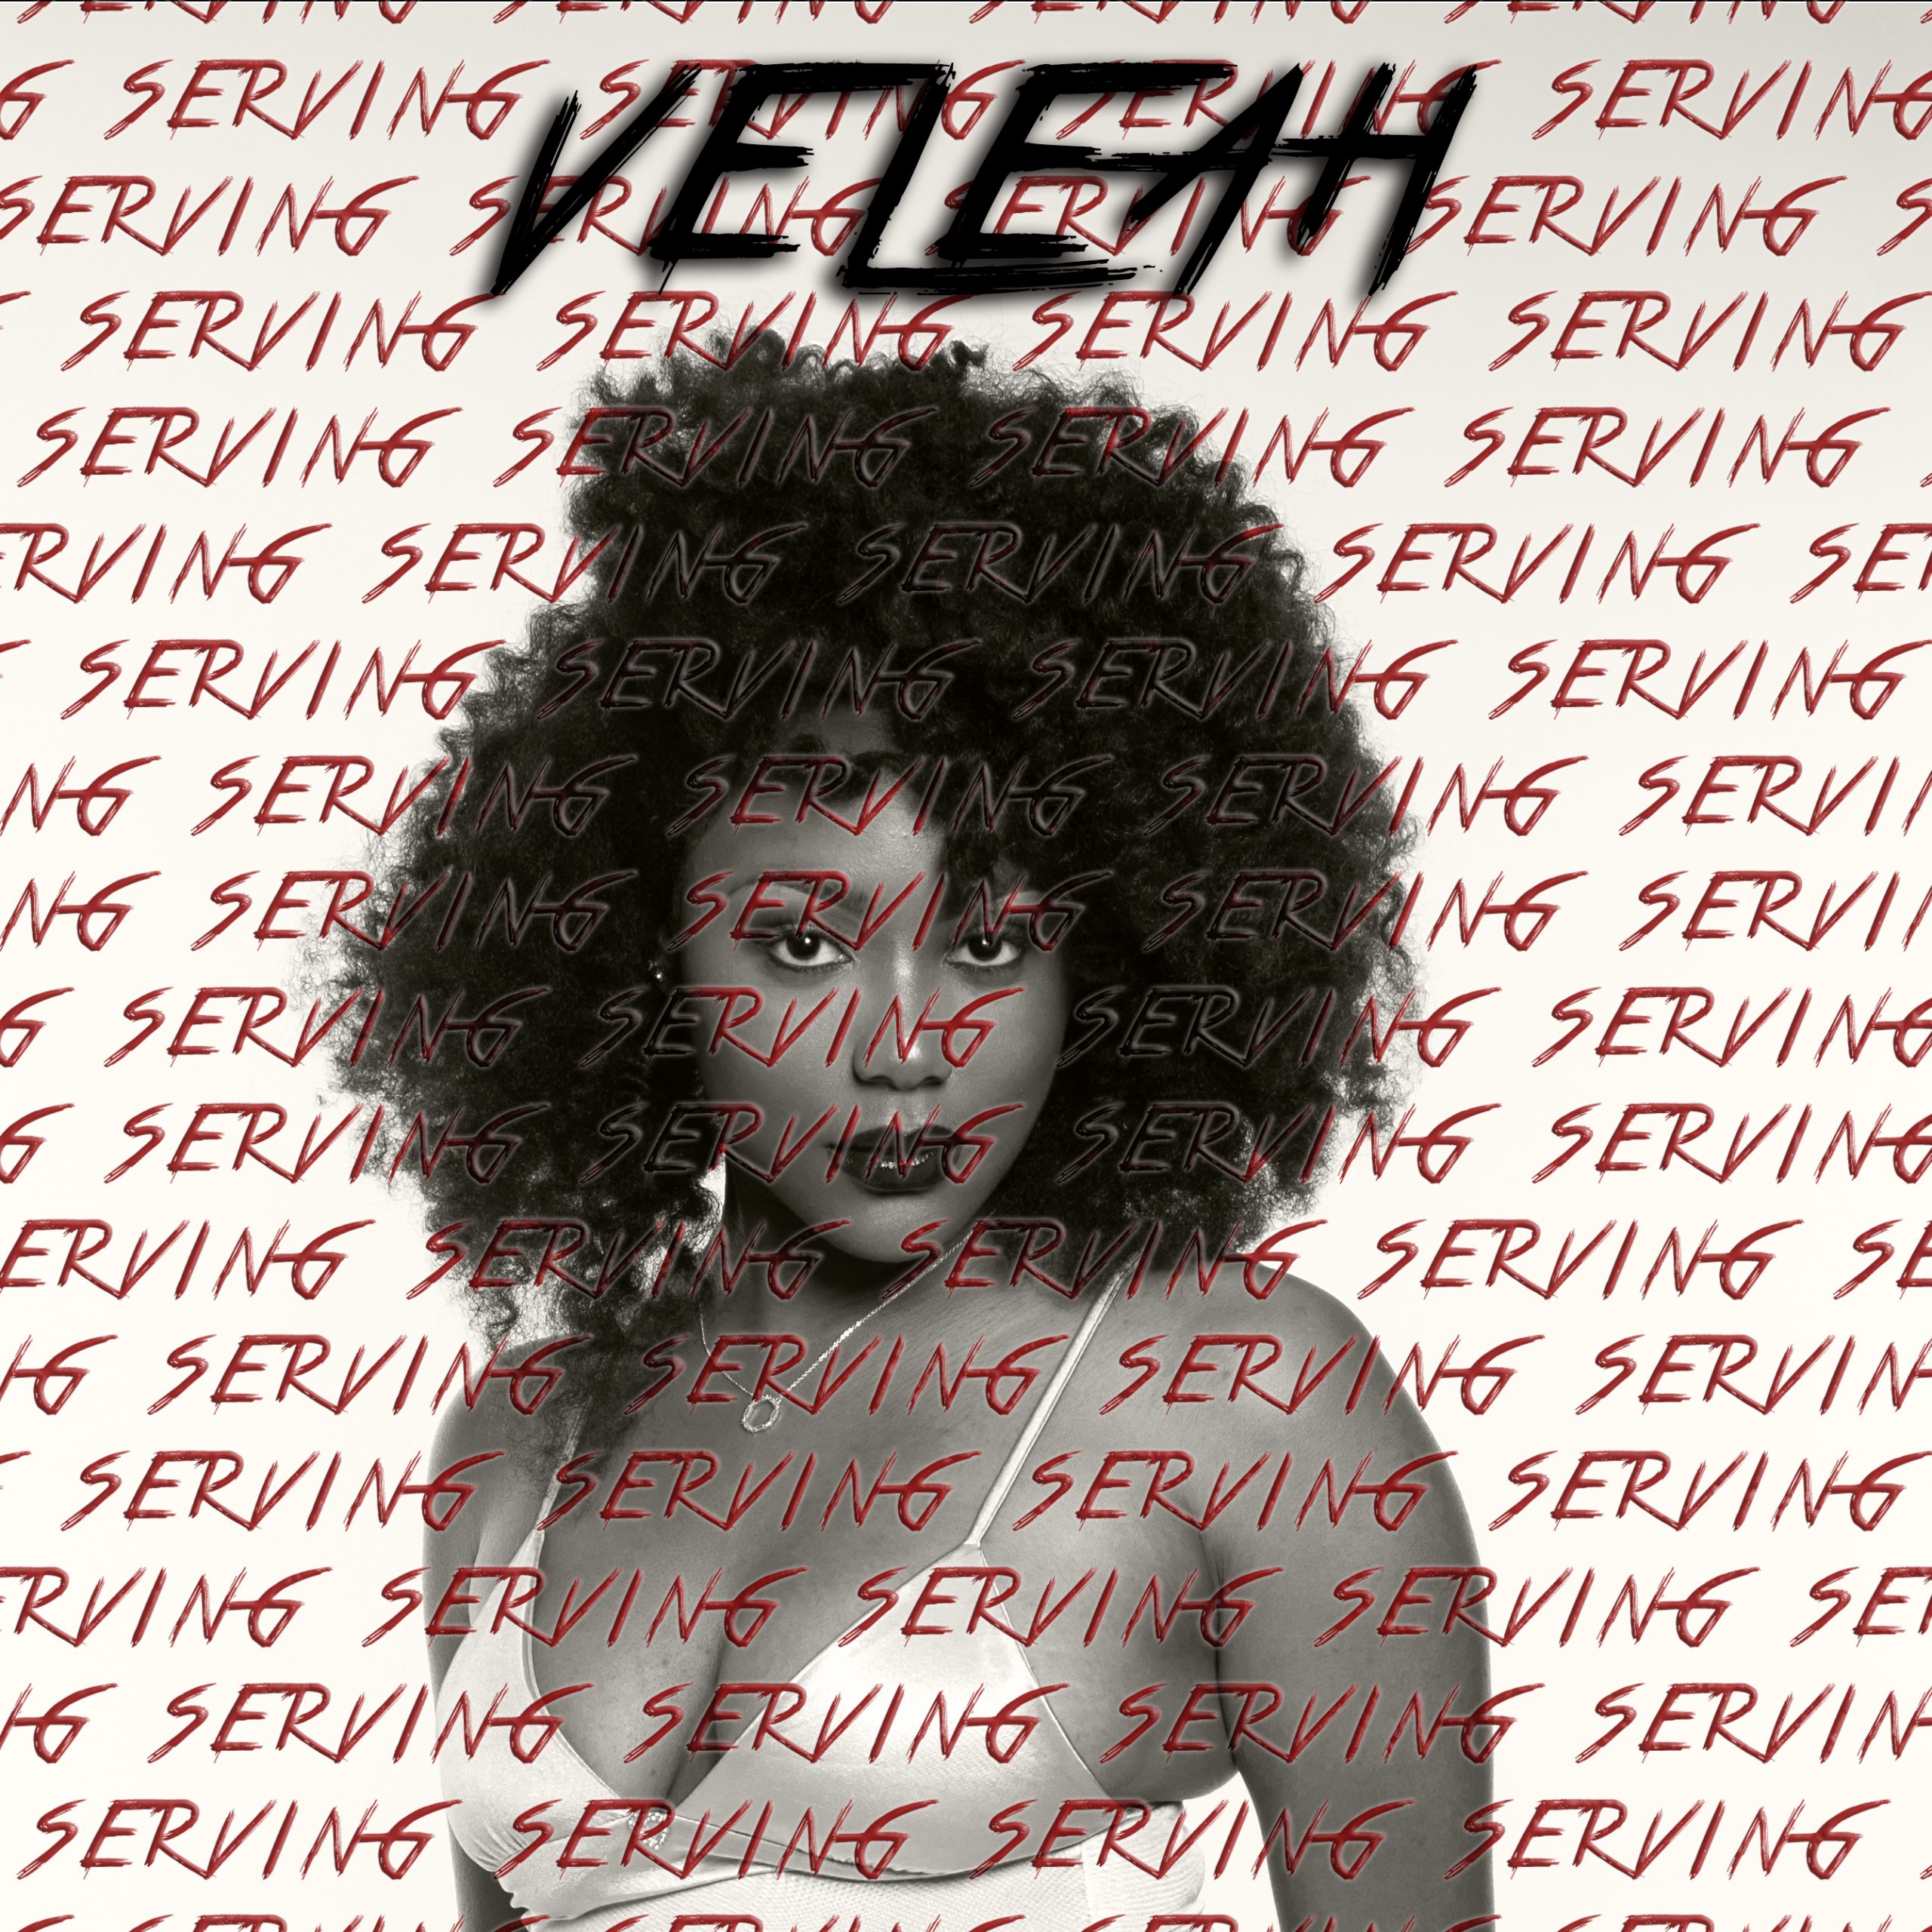 ‘ VeLeah’ releases new single ‘Serving’ with a subsonic weight that’ll push speaker systems to their limits